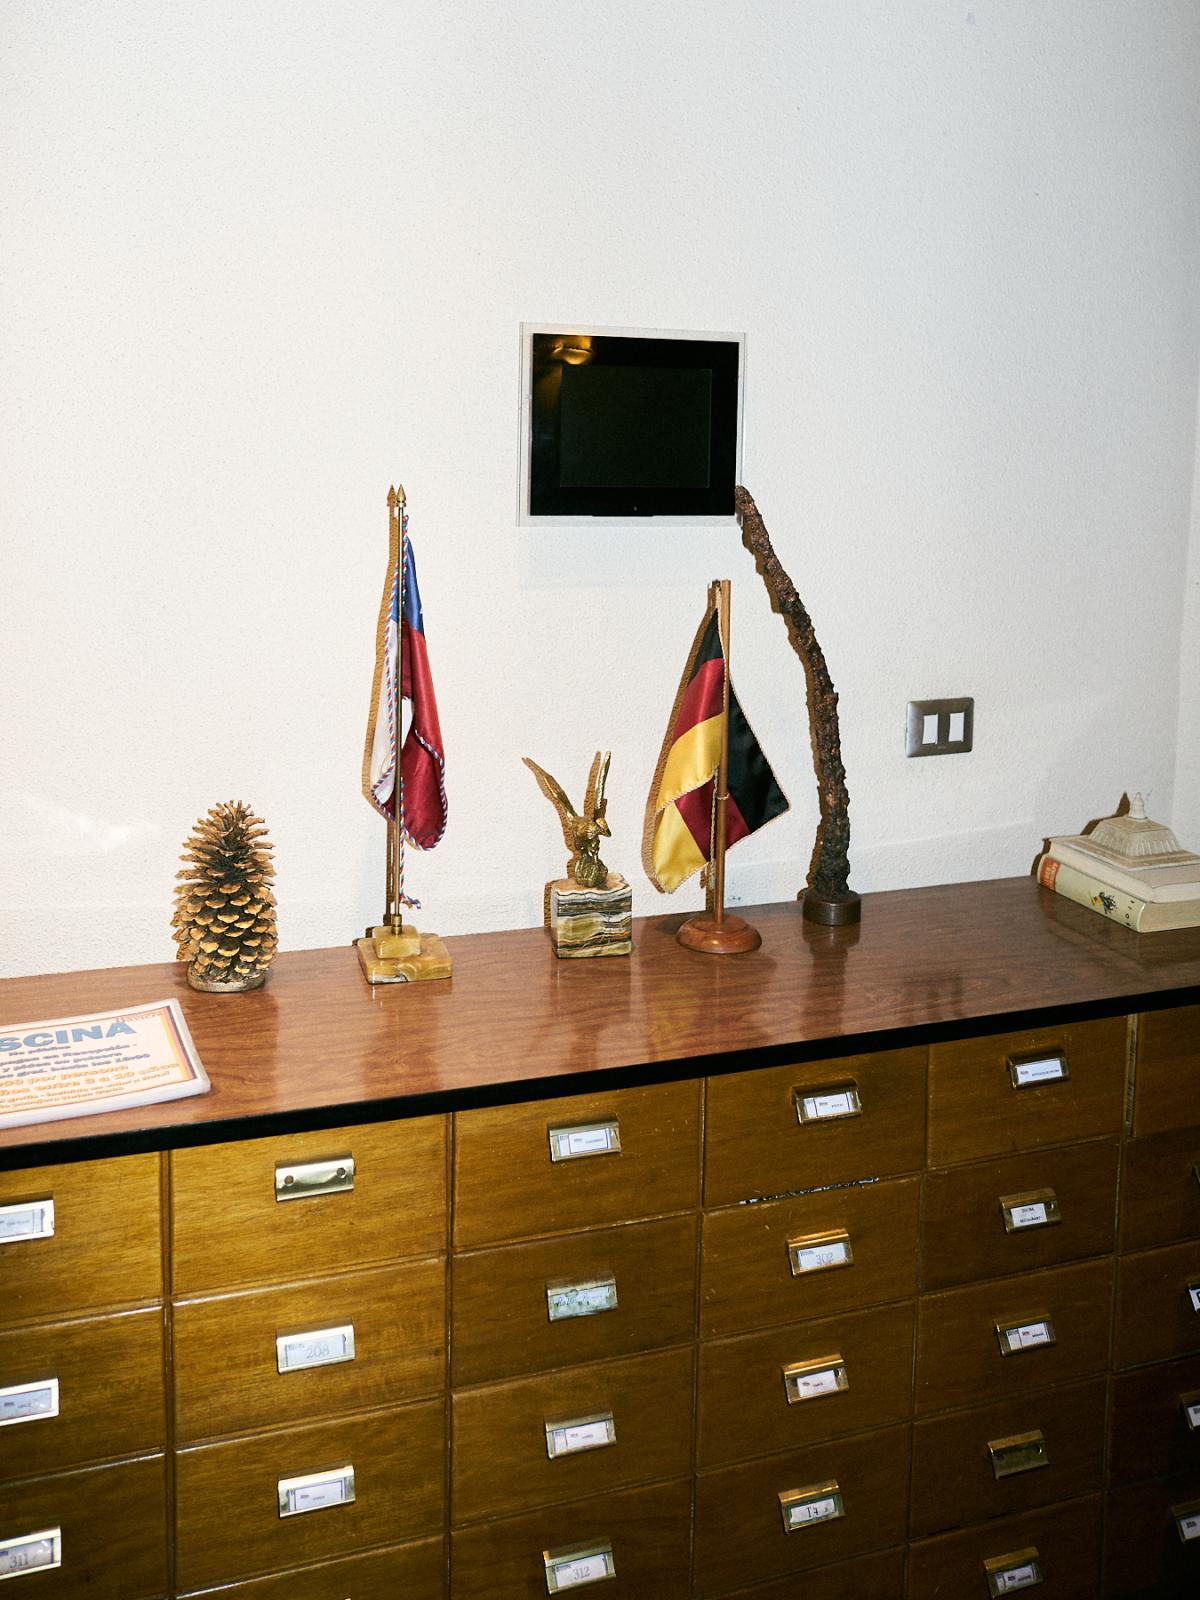 𝐈𝐈. The brief glimpse of a settler's dream - Chilean and German flags behind the desk in the...